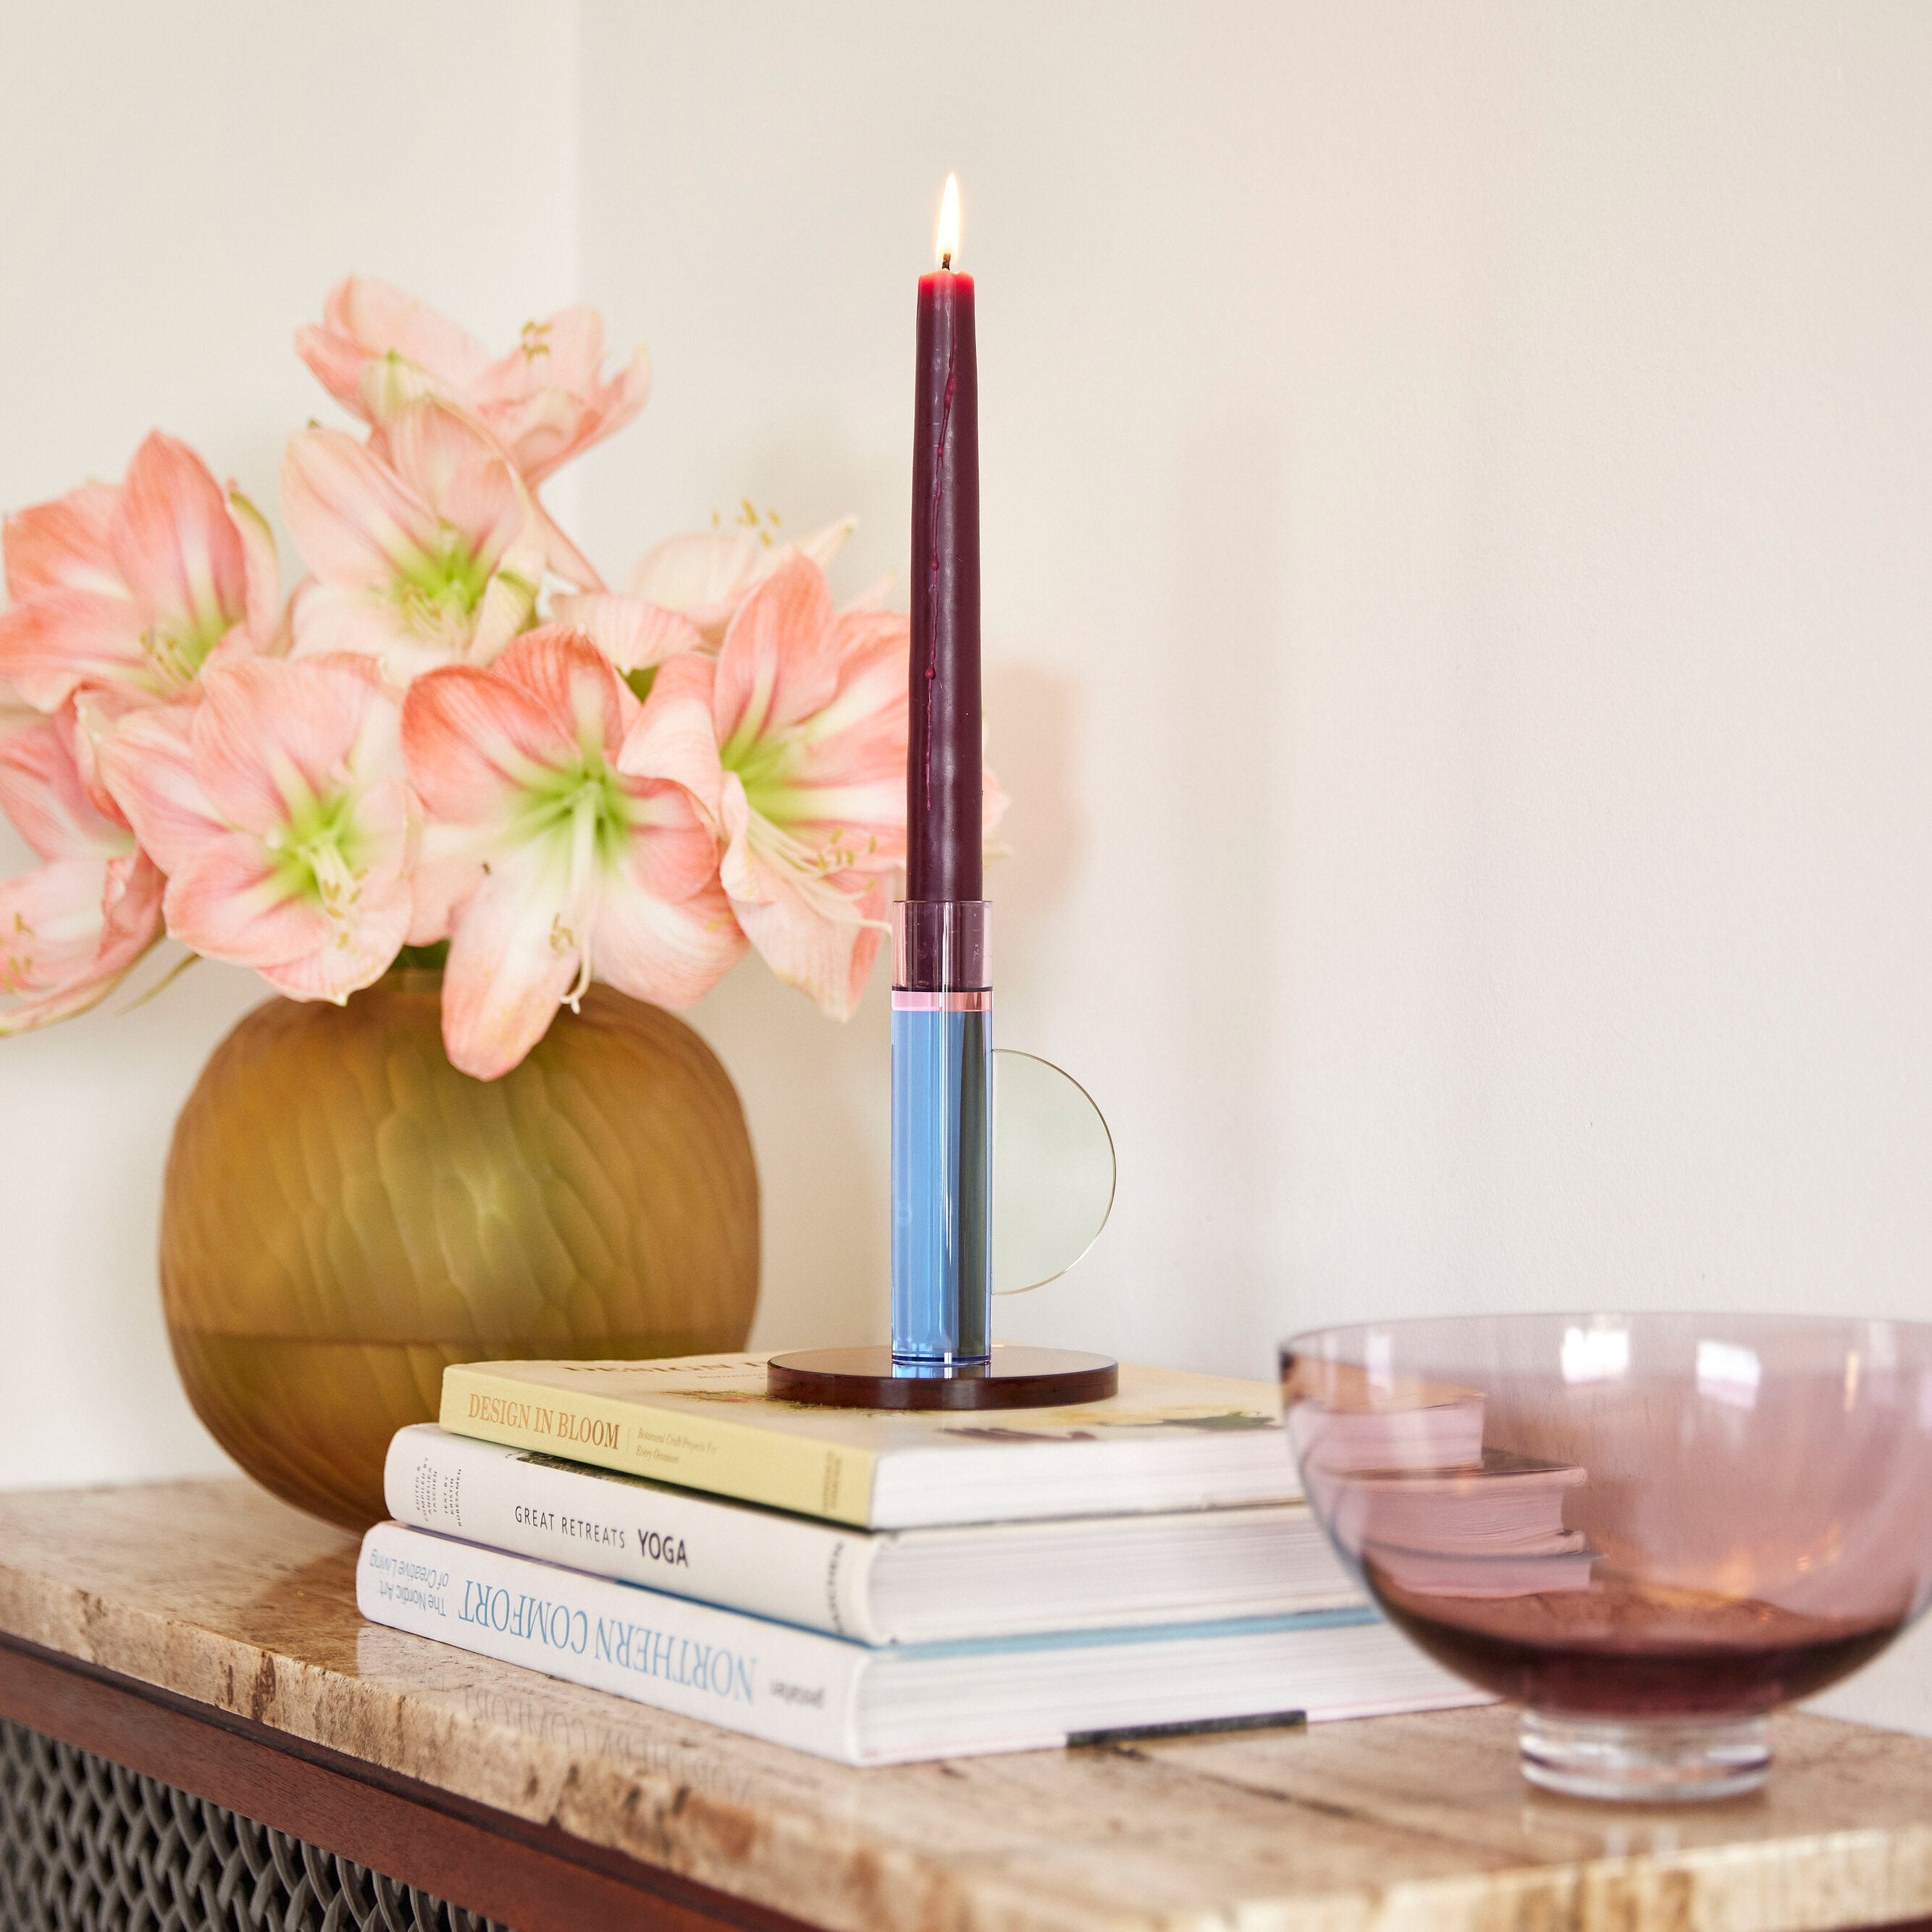 Candles & Candleholders – MoMA Design Store